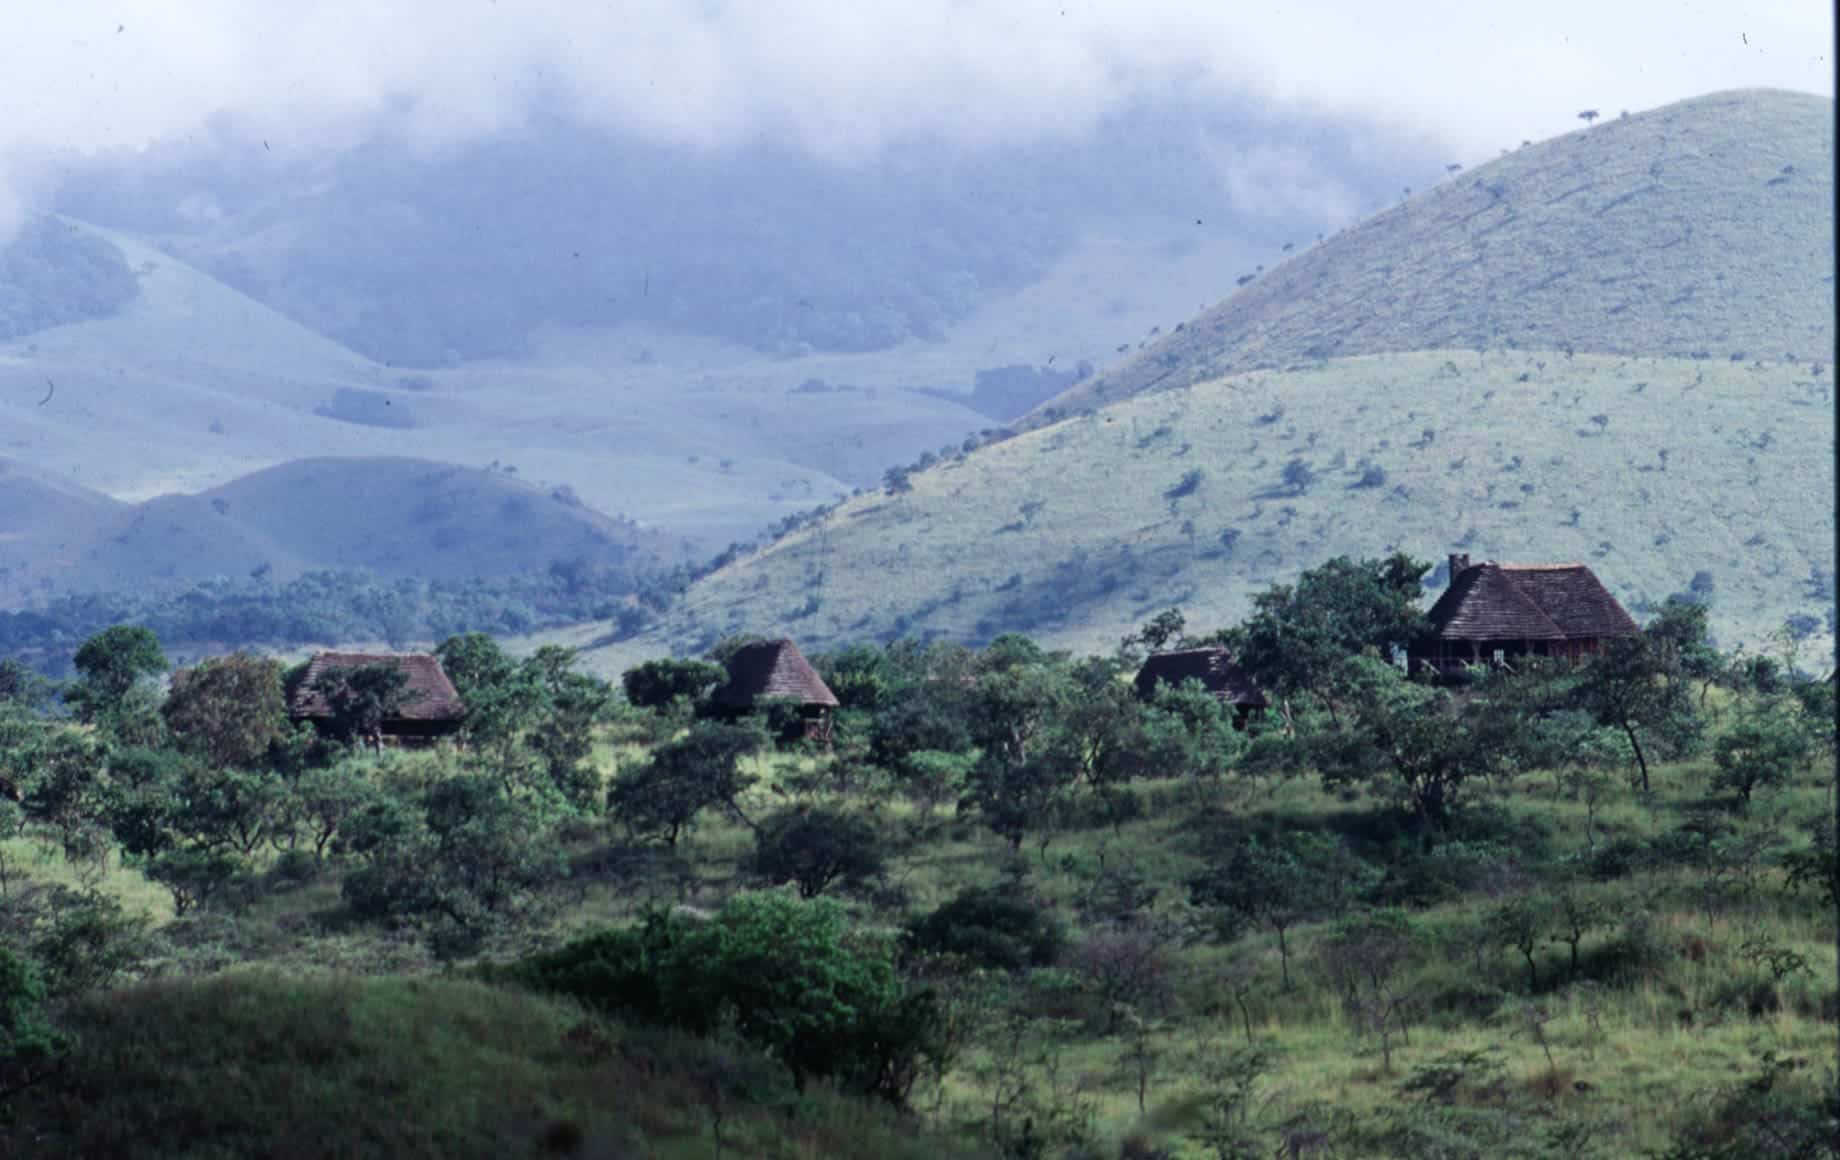 Houses in the middle of nature at Chyulu Hills